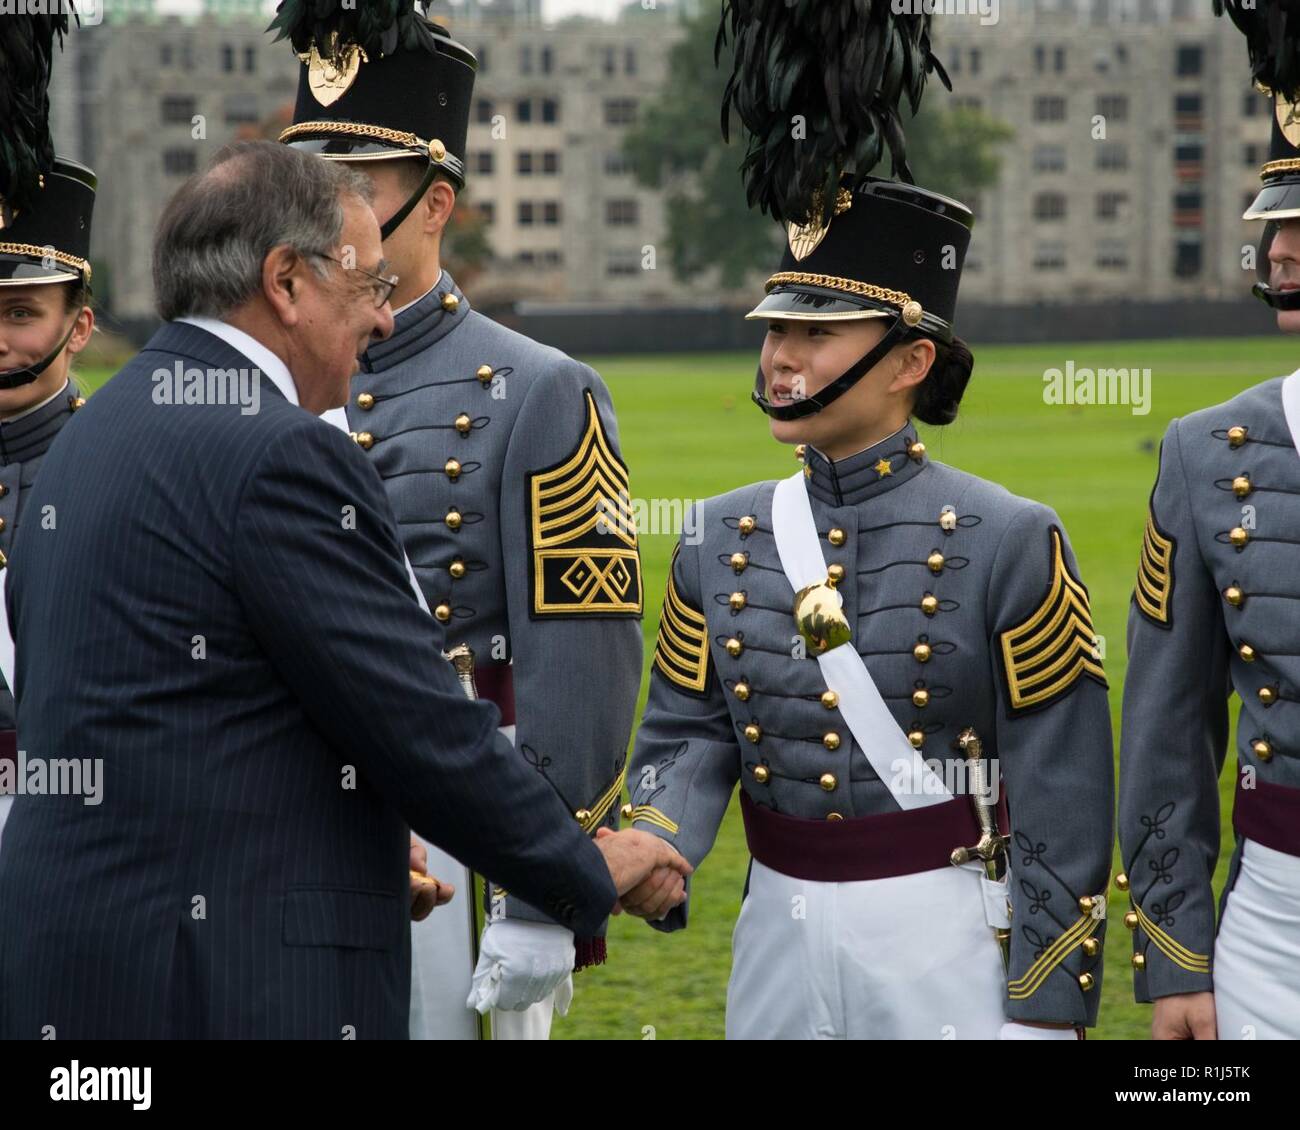 The 23rd U.S. Secretary of Defense and 2018 Sylvanus Thayer Award recipient Leon Panetta engages with West Point cadets at the U.S. Military Academy, in West Point, N.Y.,  Oct. 4, 2018.  The Thayer Award is given to a citizen of the United States, other than a West Point graduate, whose outstanding character, accomplishments, and stature in the civilian community draw wholesome comparison to the qualities for which West Point strives, in keeping with its motto: “Duty, Honor, Country.” Stock Photo